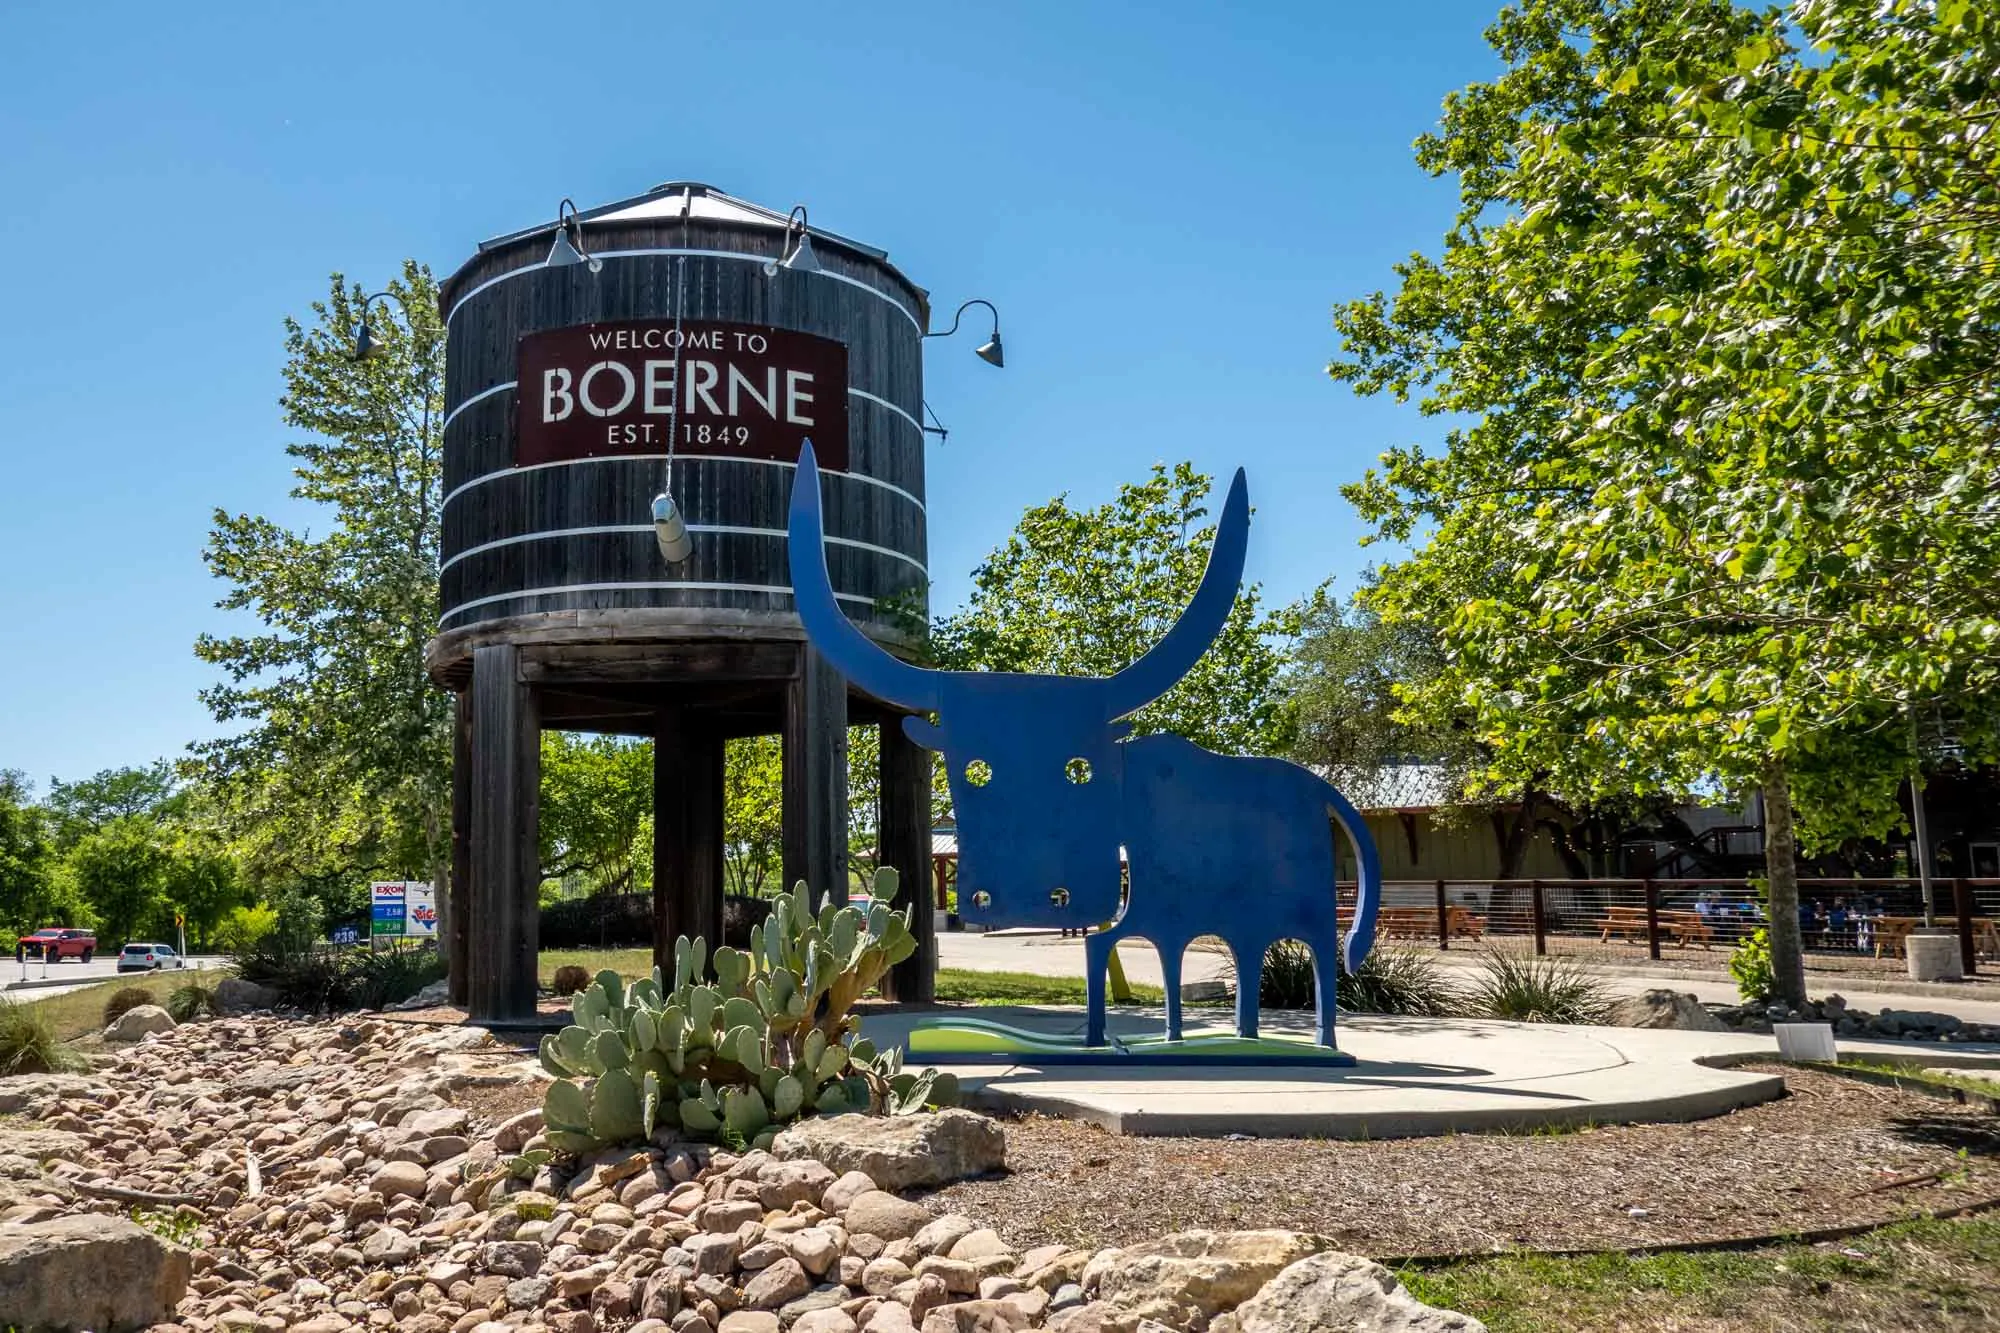 Sculpture of a blue bull with a cartooonish appearance next to a water tower with the sign "Welcome to Boerne, Est. 1849"